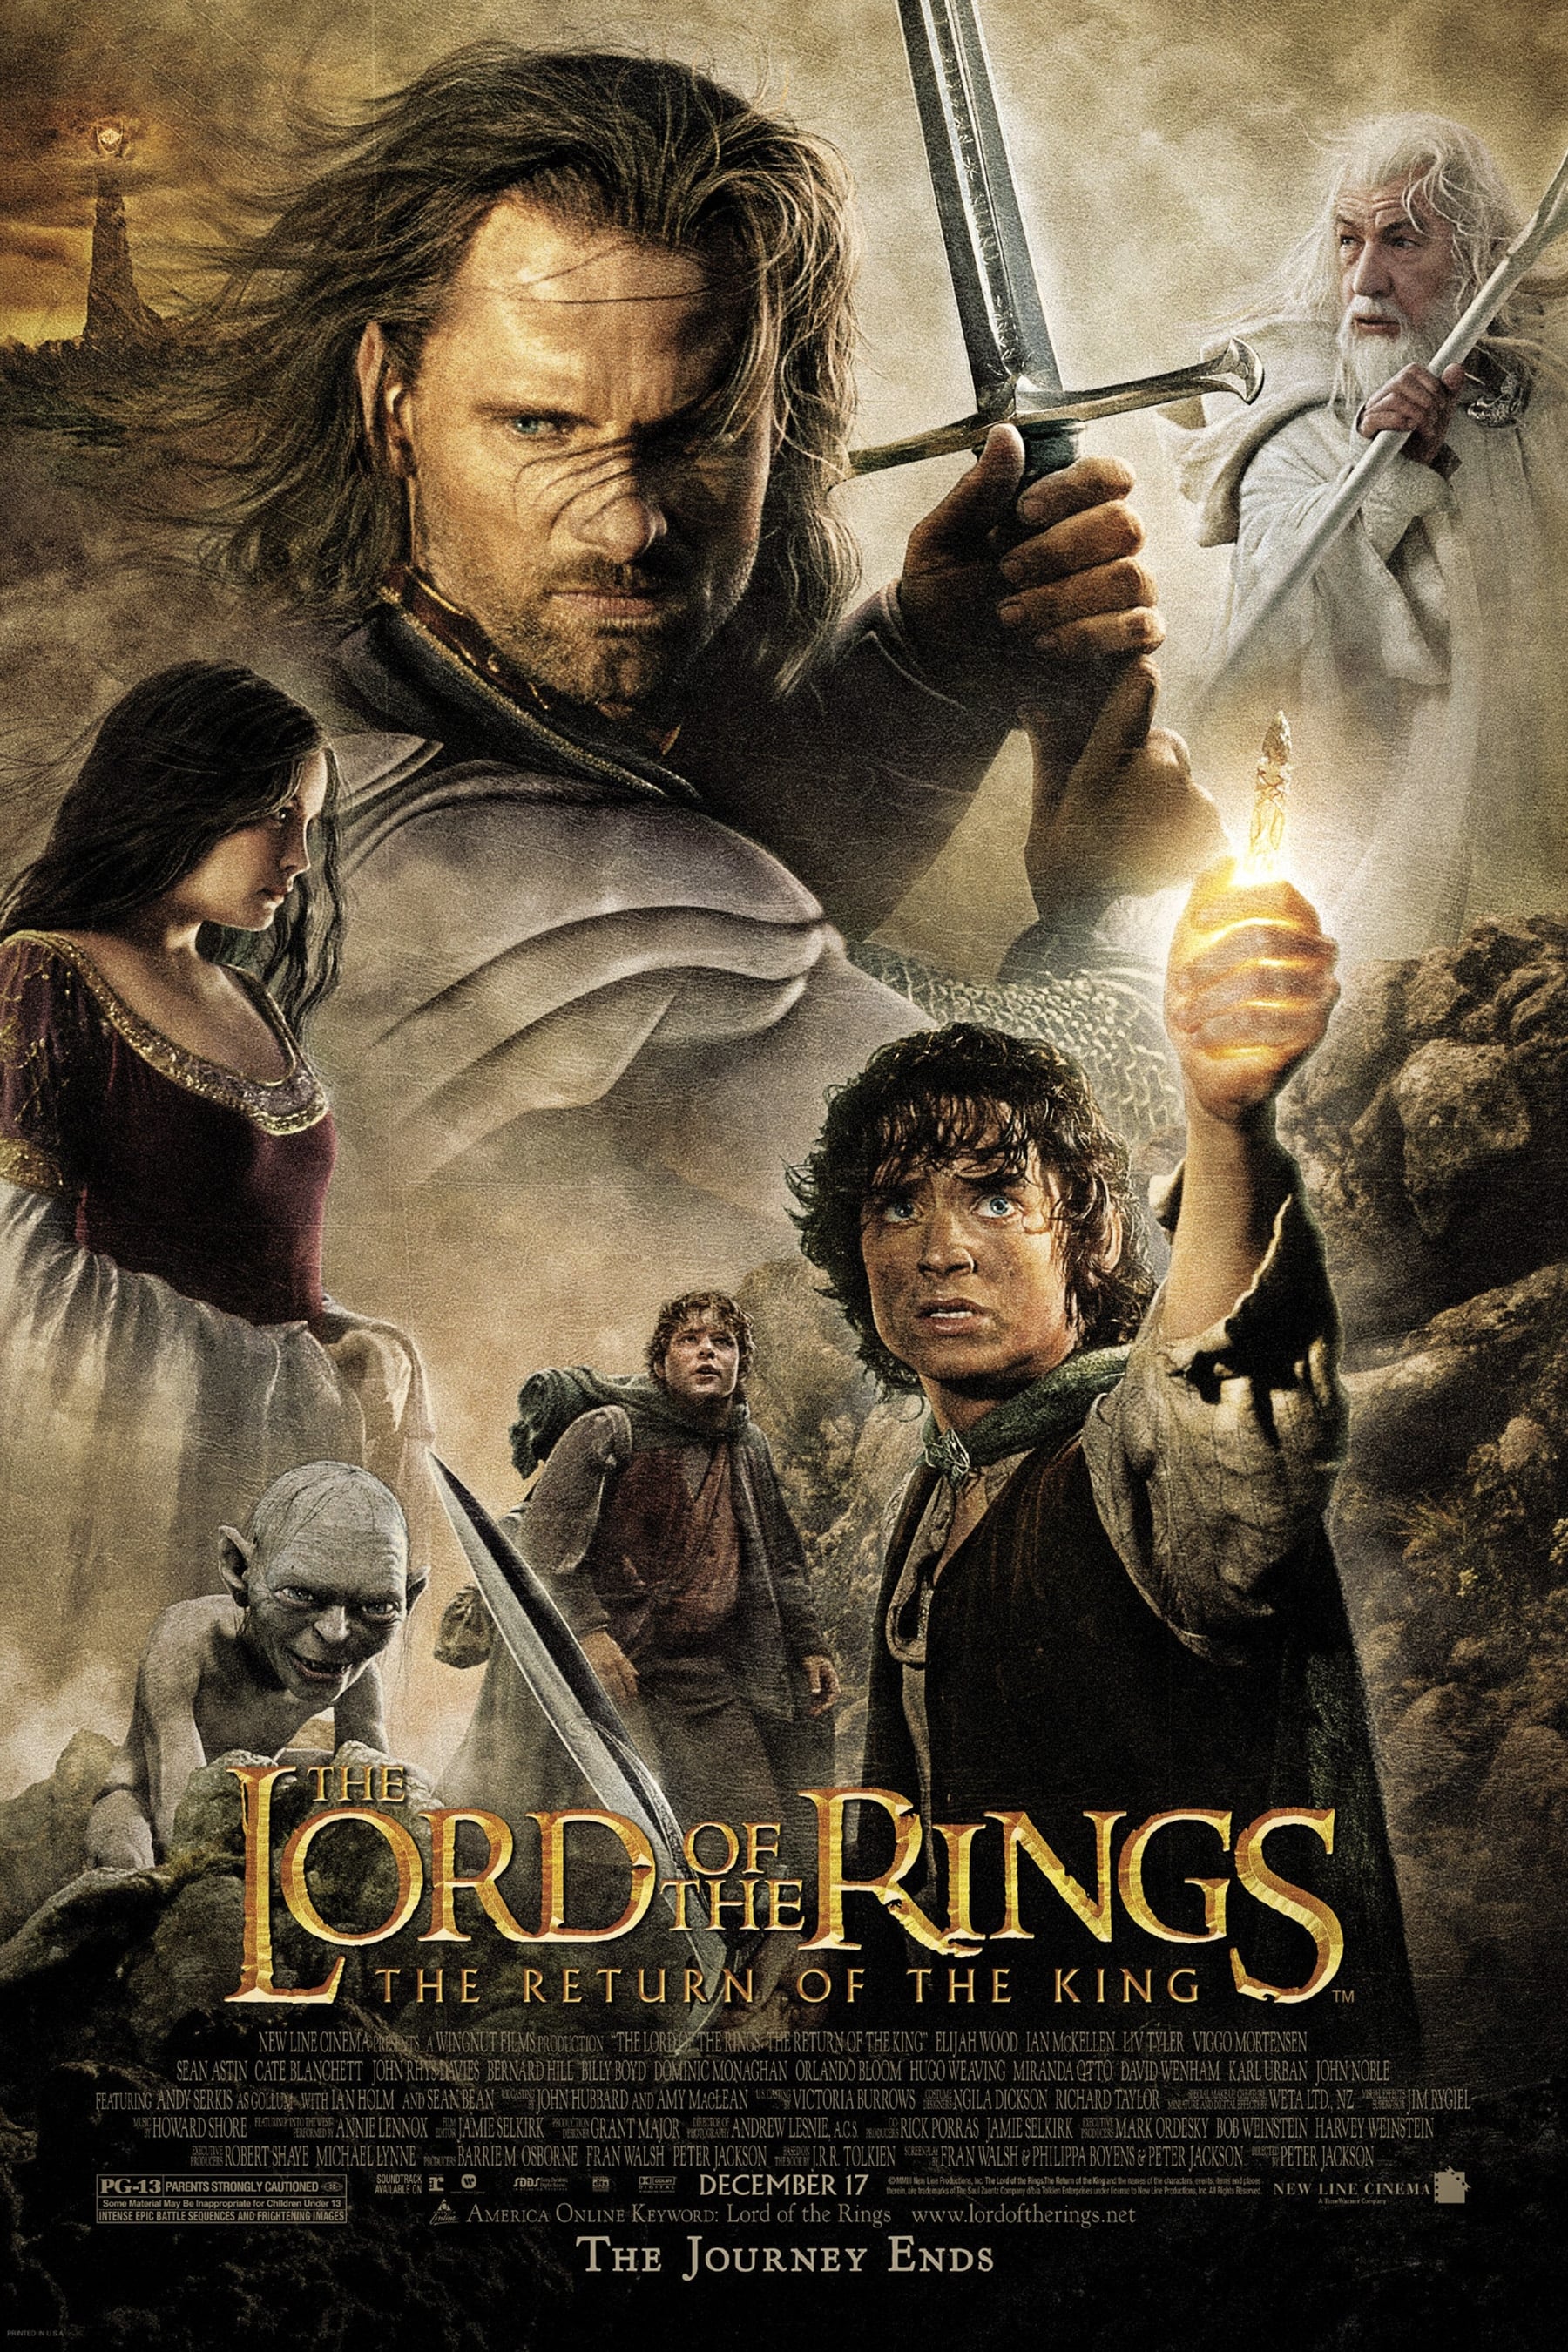 EN - The Lord Of The Rings: The Return Of The King (2003)